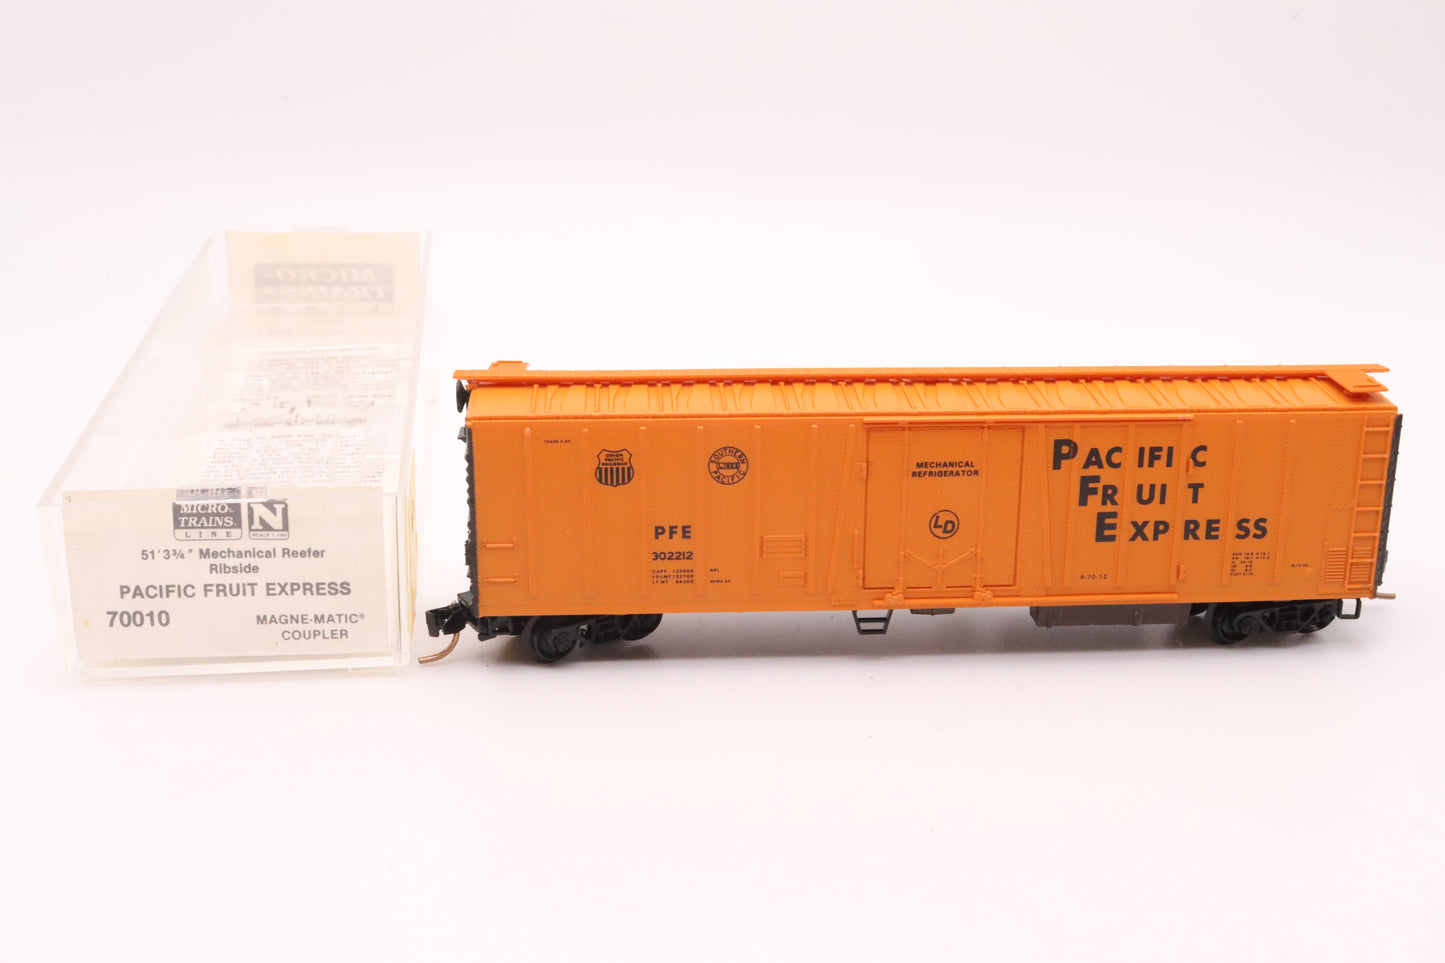 MTL-70010 - 51' 3 3/4" Rib Side Mechanical Reefer - Pacific Fruit Express - PFE #302212